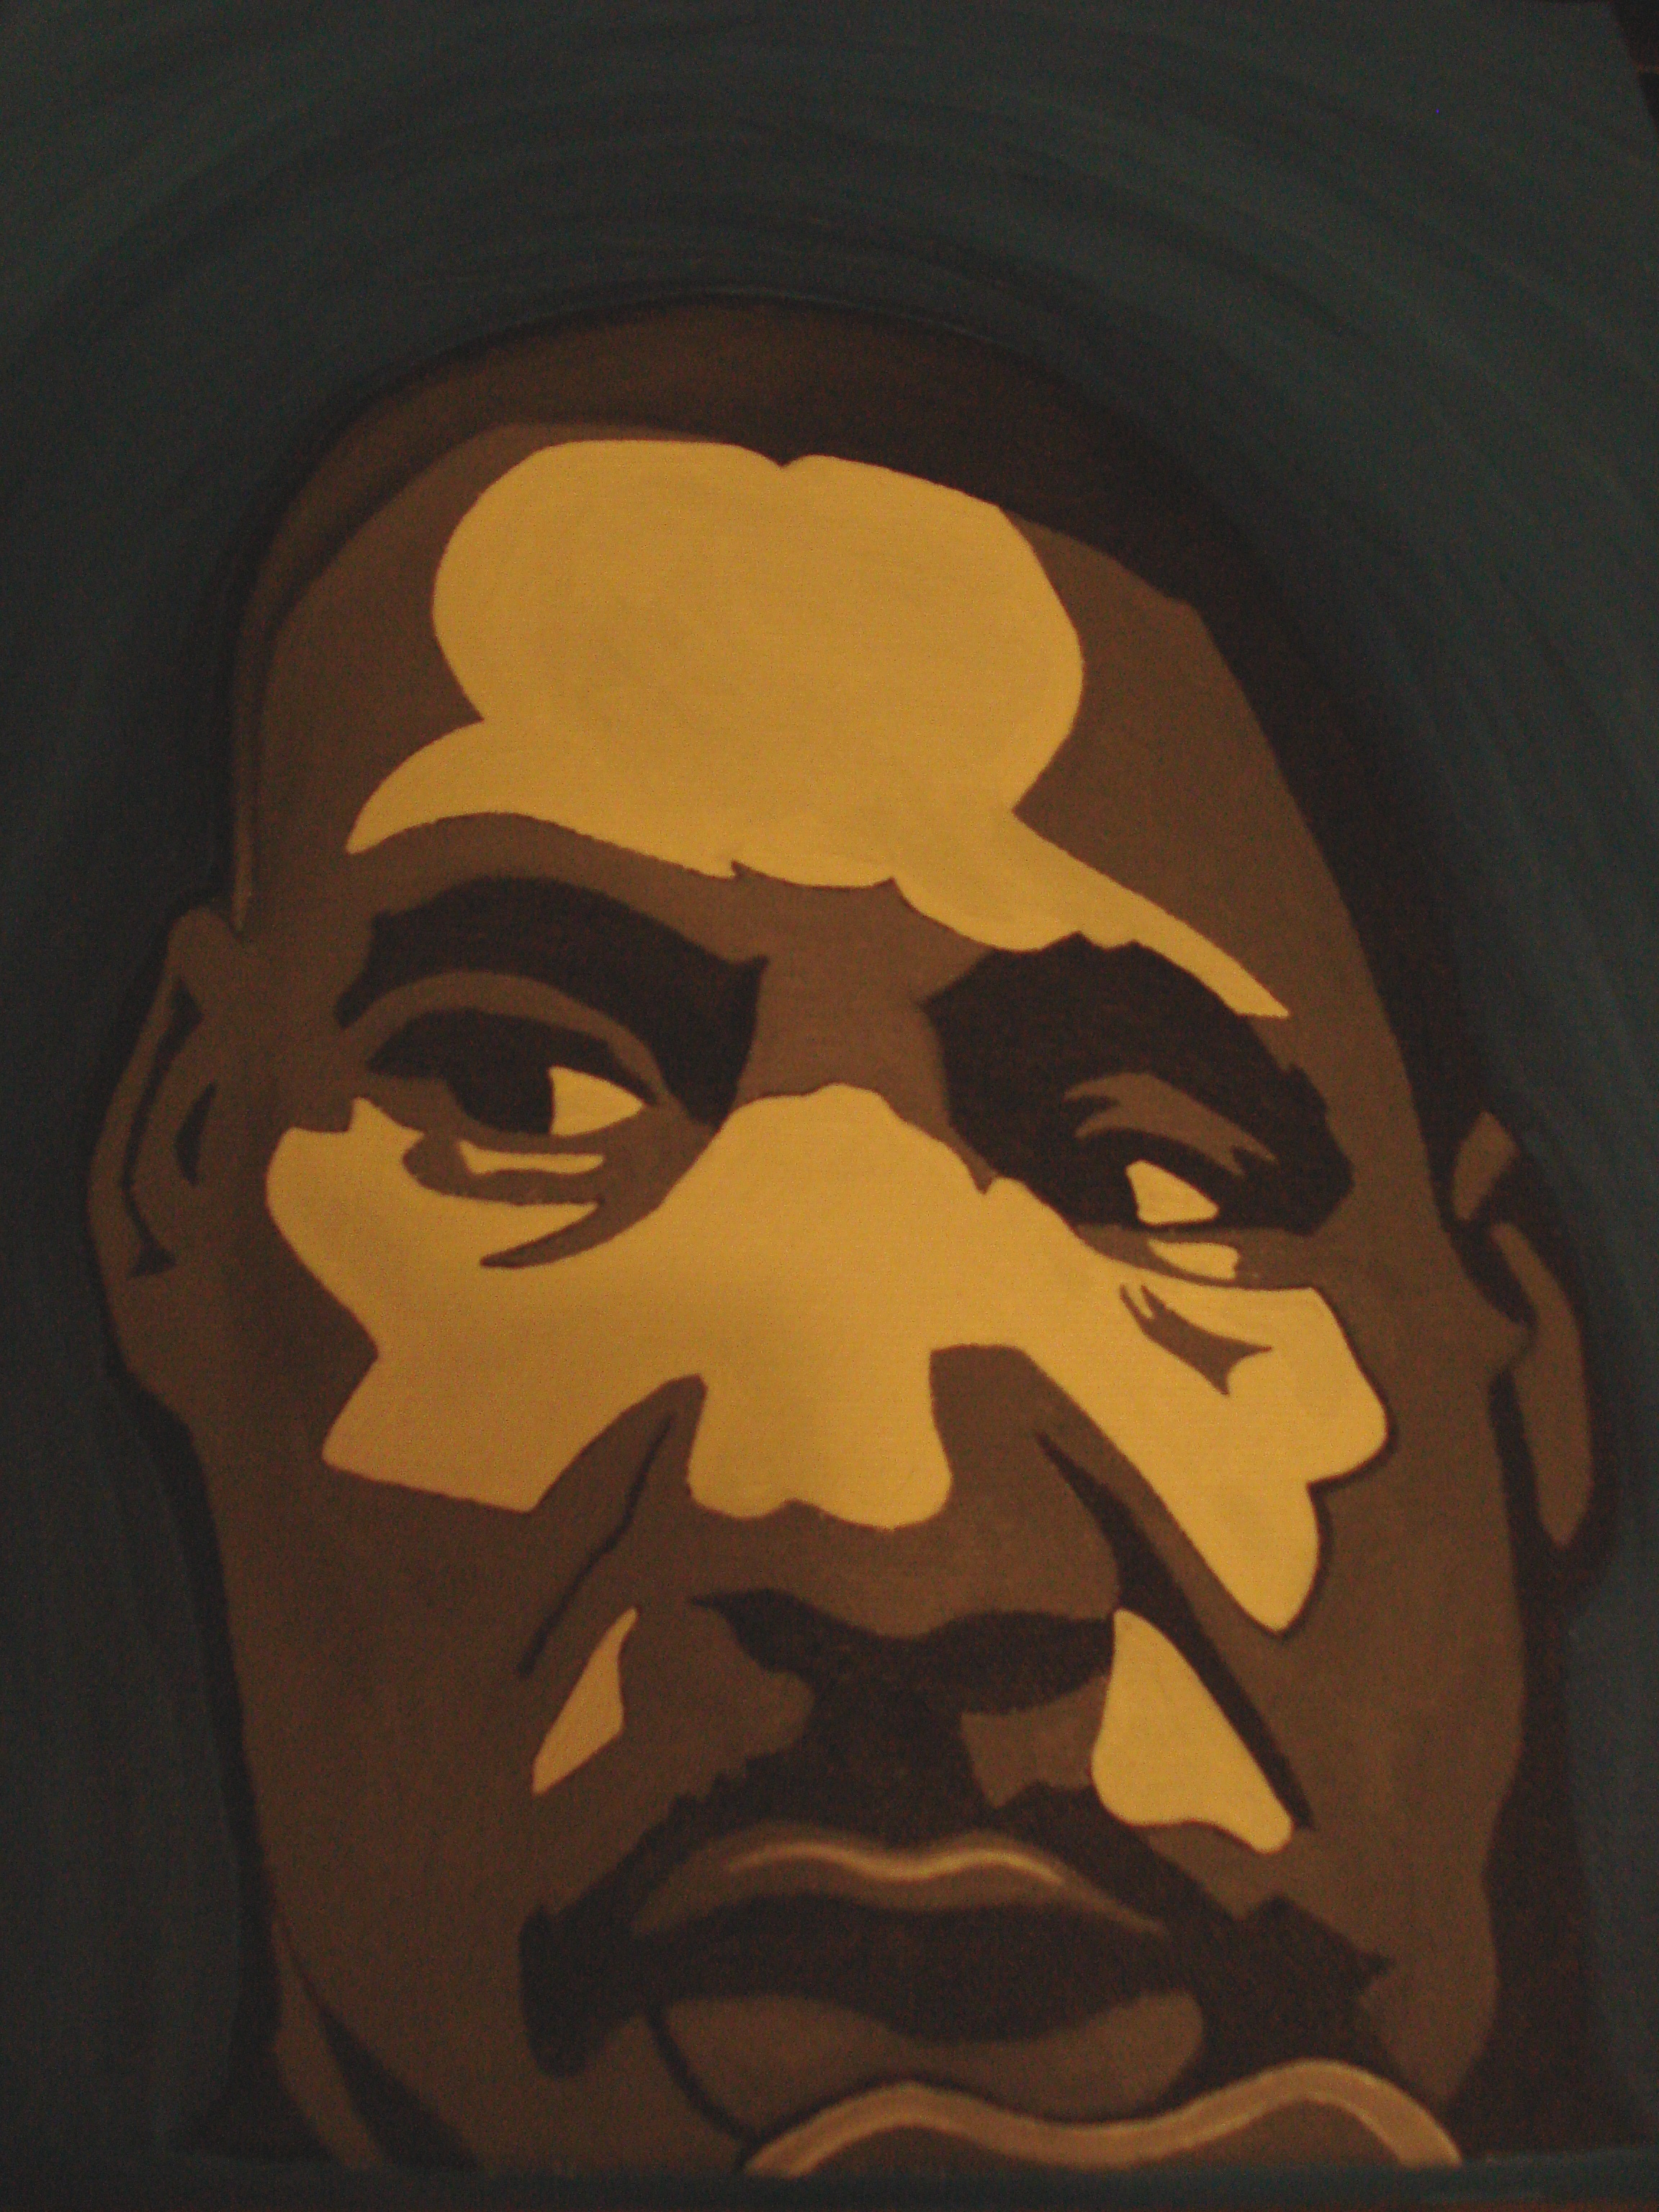 Oil painting of Dr. Martin Luther King Jr. painted by Thomas Carli.